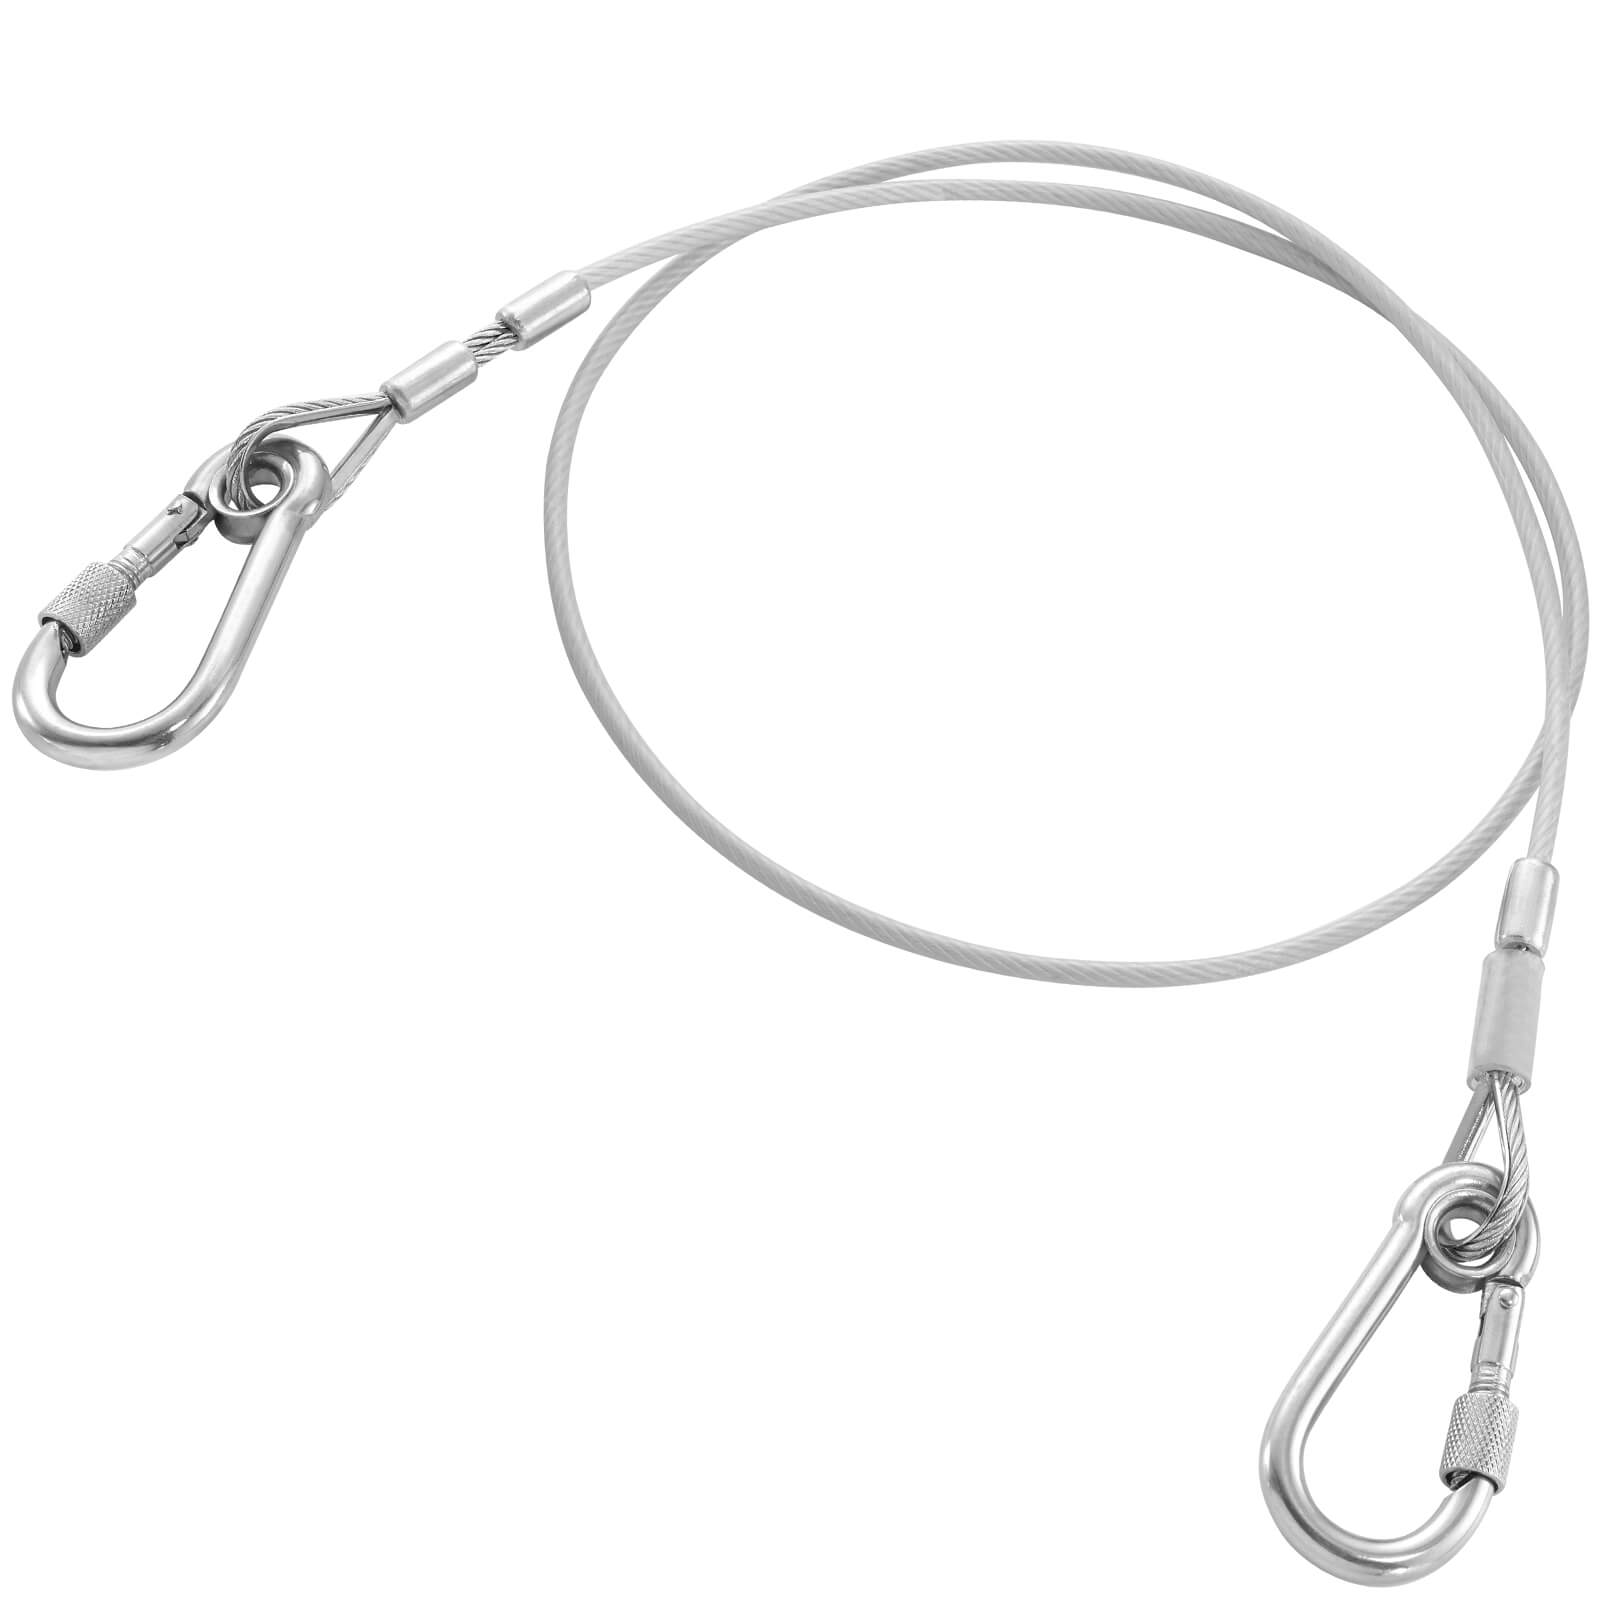 Photo of Facom Sls Safety Lock System Steel Lanyard Cable